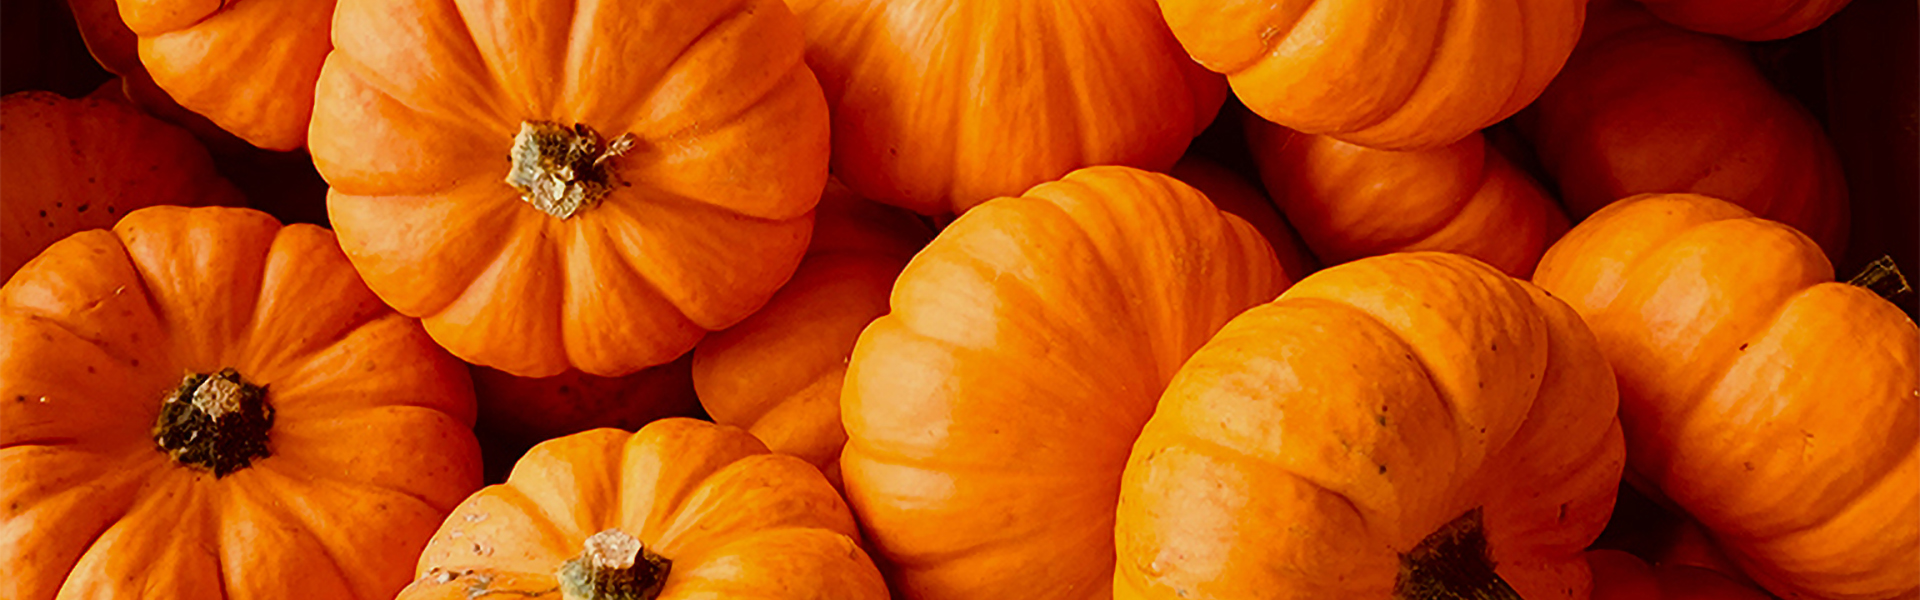 Know Your Food: Pumpkin